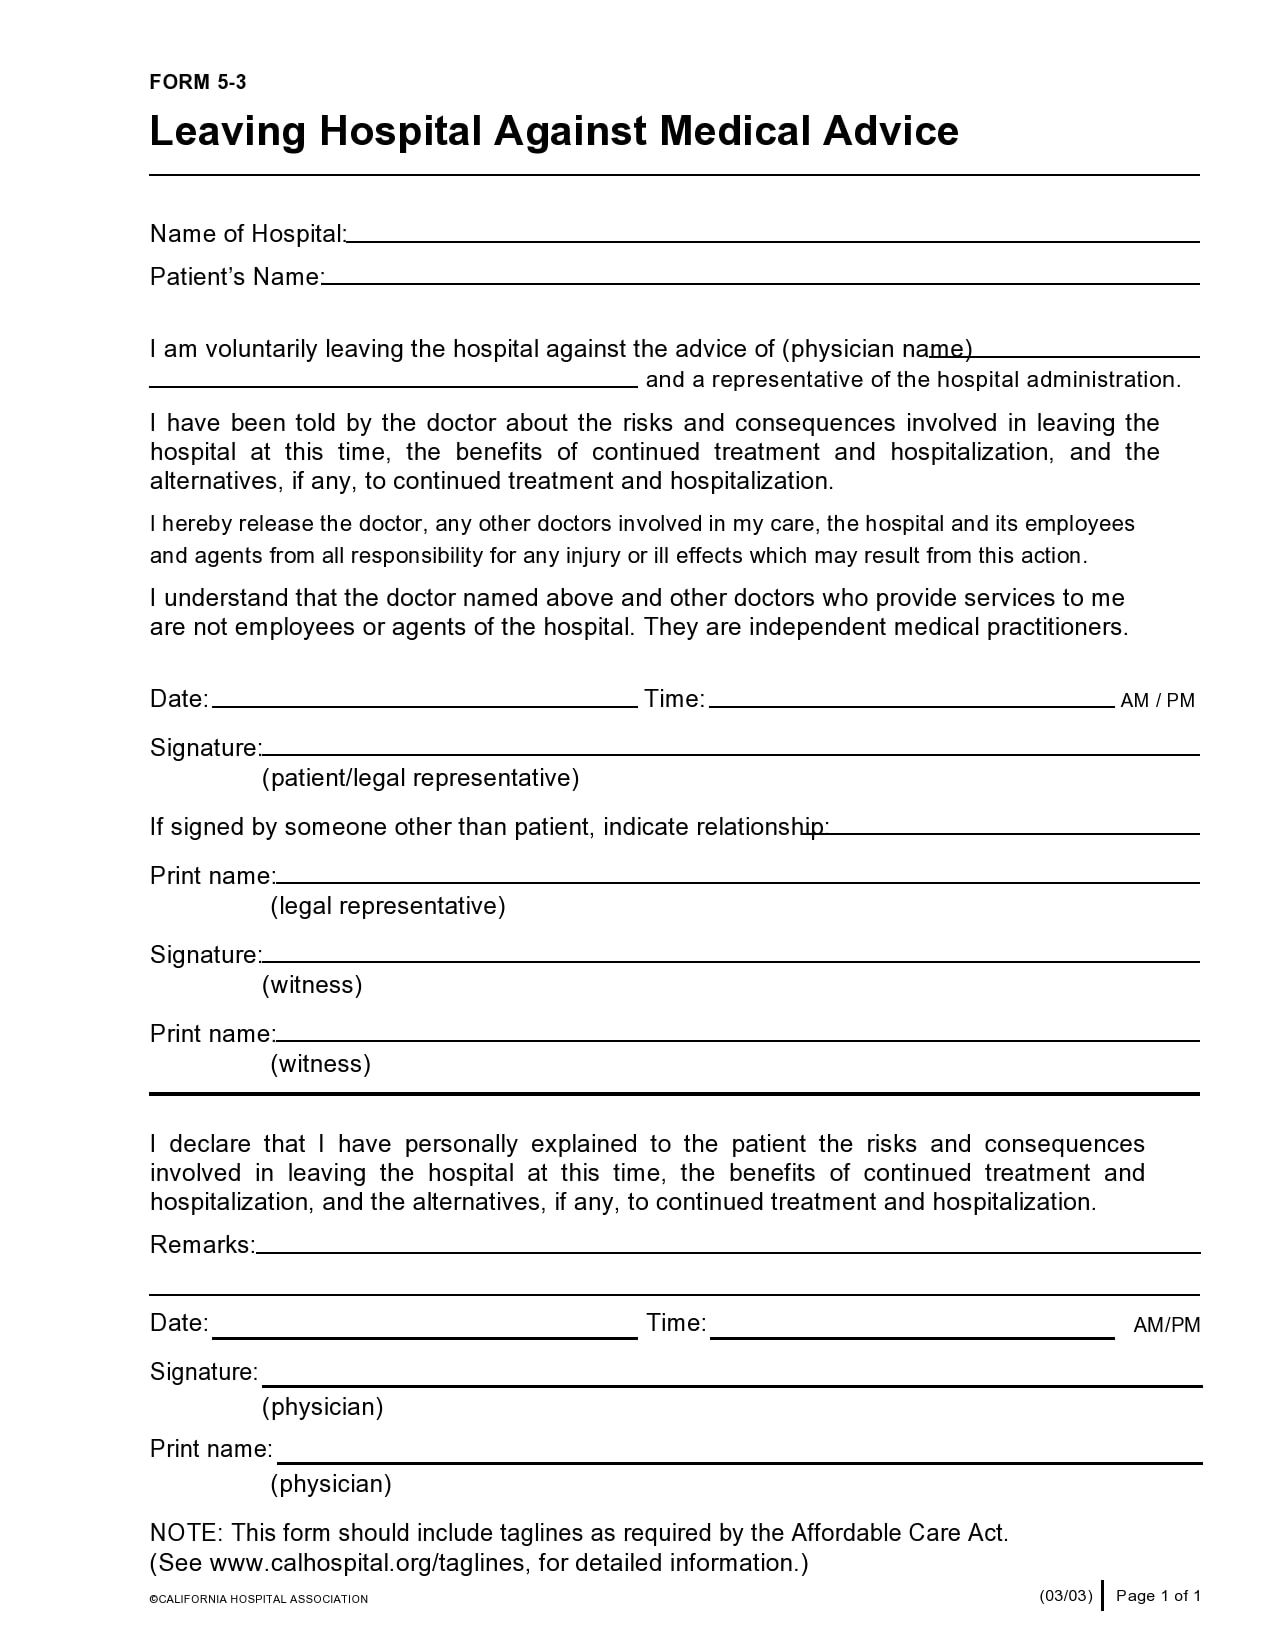 Against Medical Advice Form Fill Out And Sign Printab vrogue co